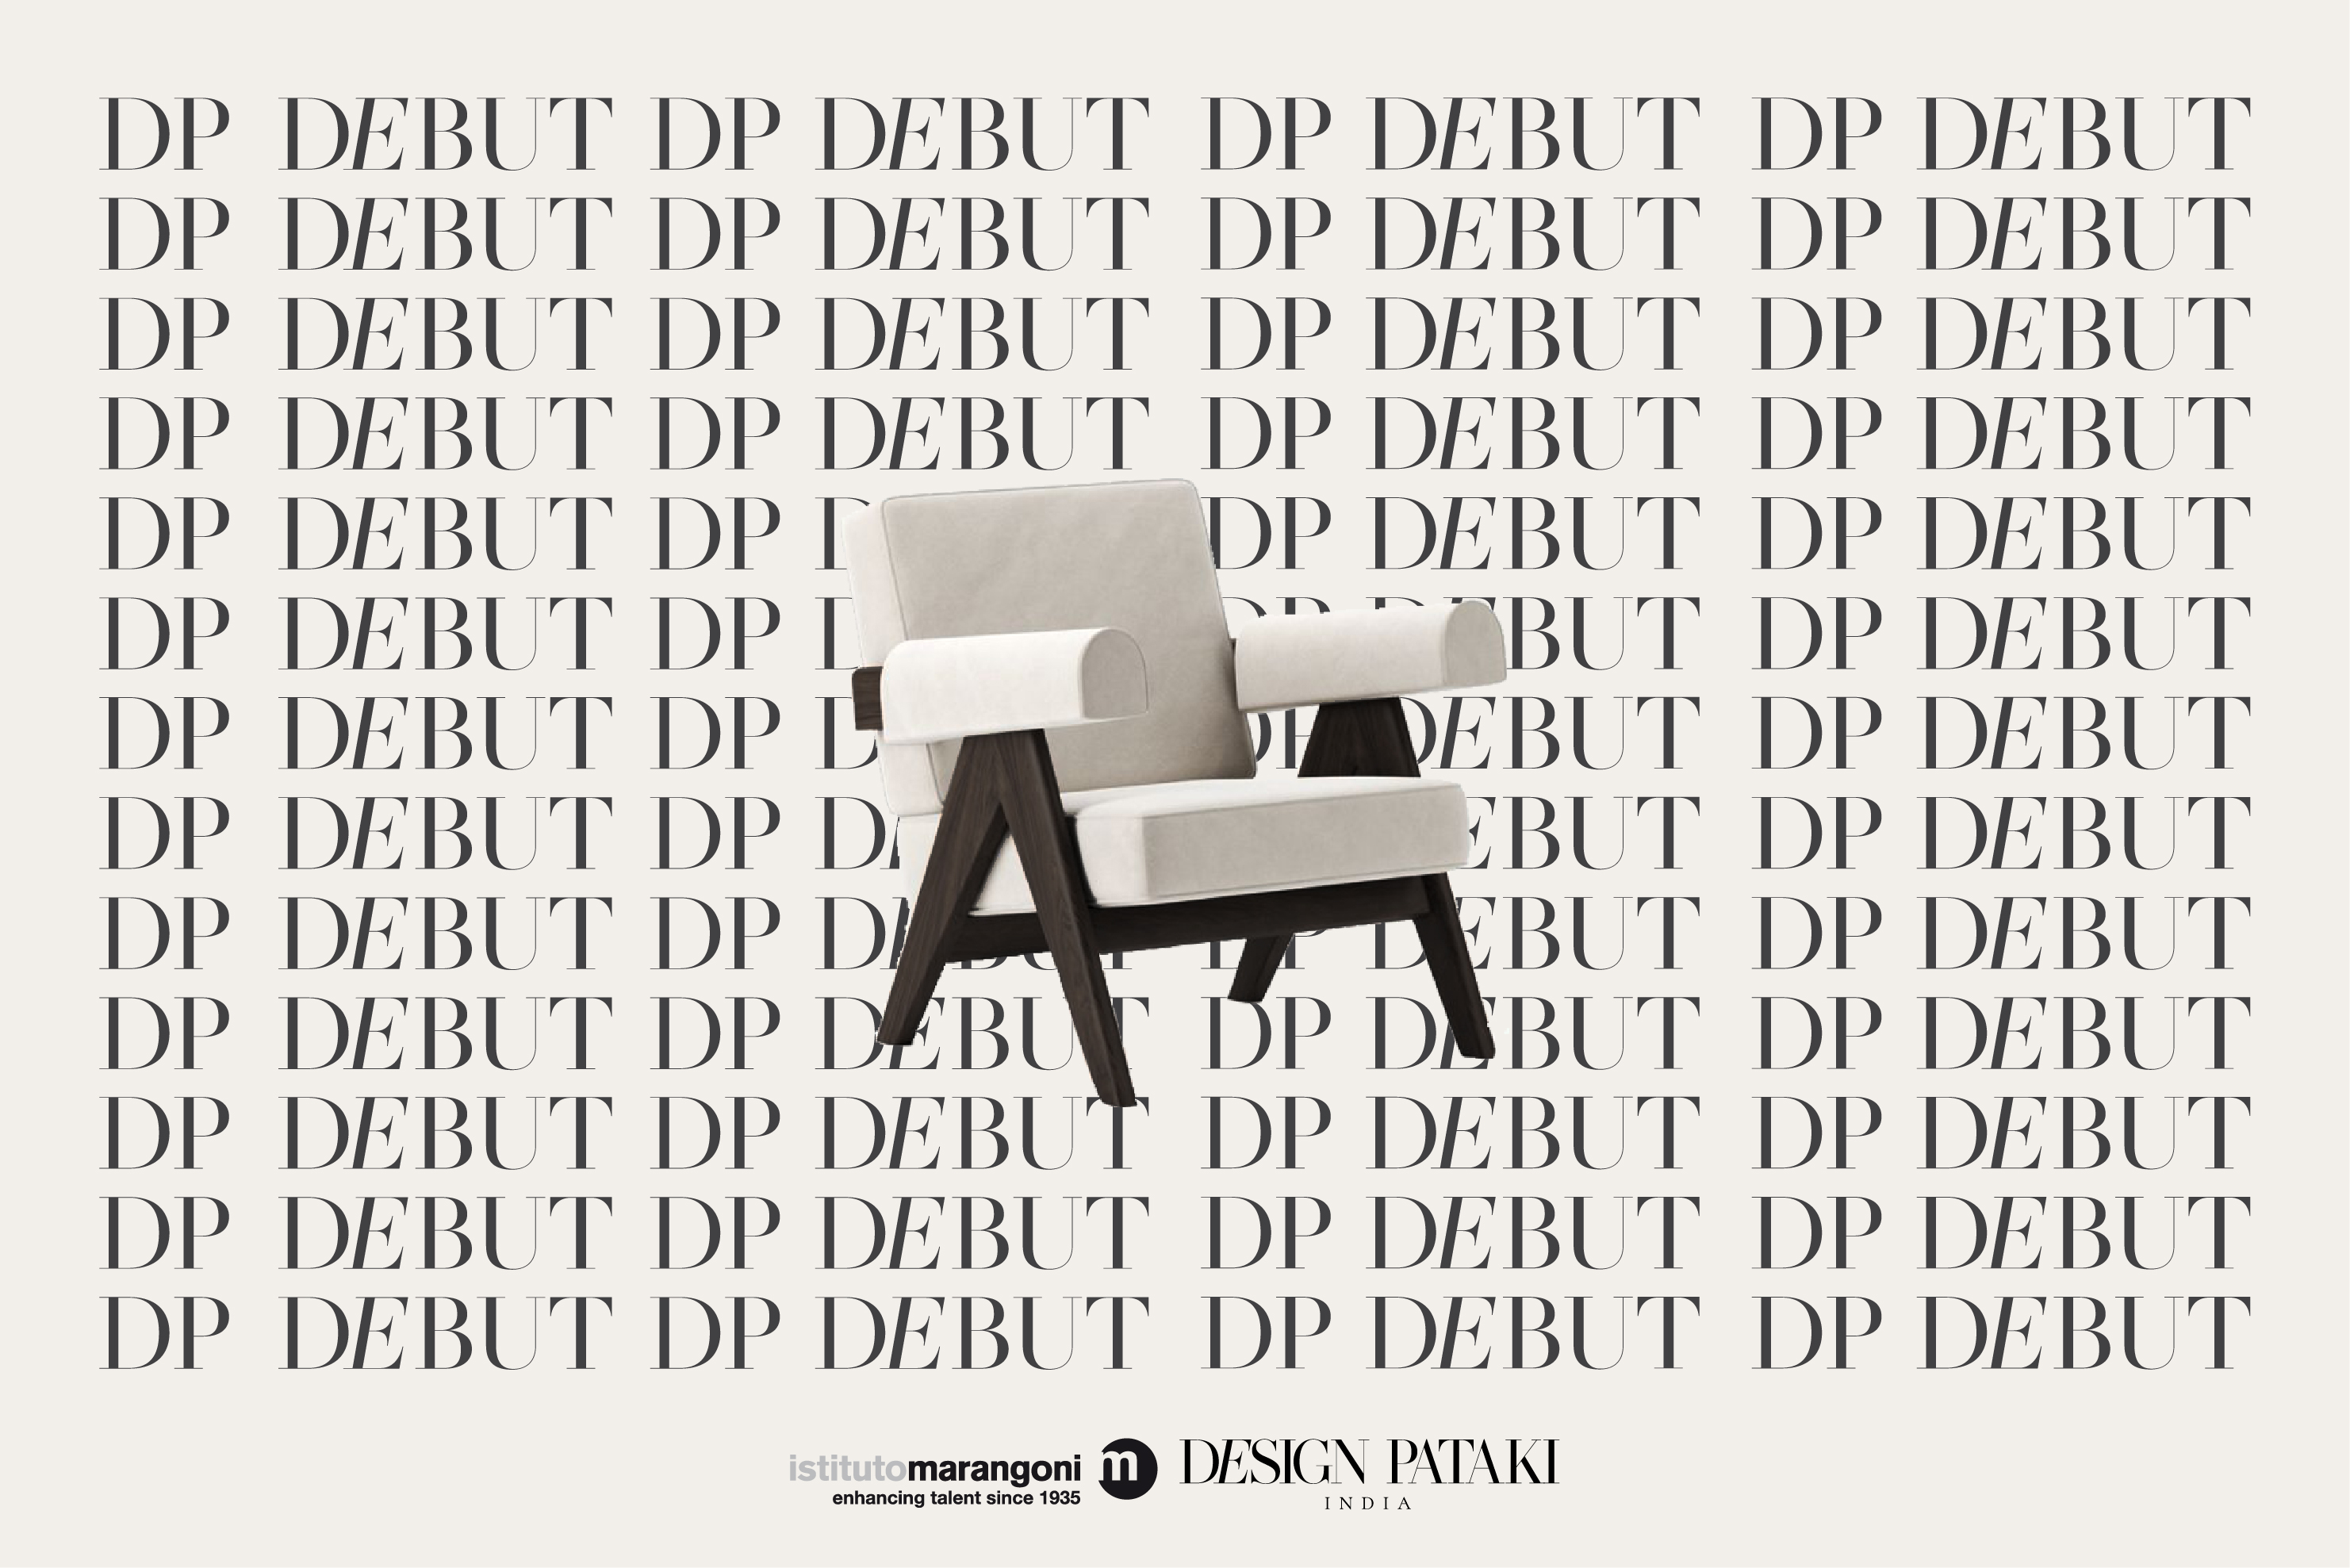 Are You Ready To Make Your Design Pataki Debut? Entries Open For The DP Debut Awards In Collaboration With Istituto Marangoni - Design Pataki